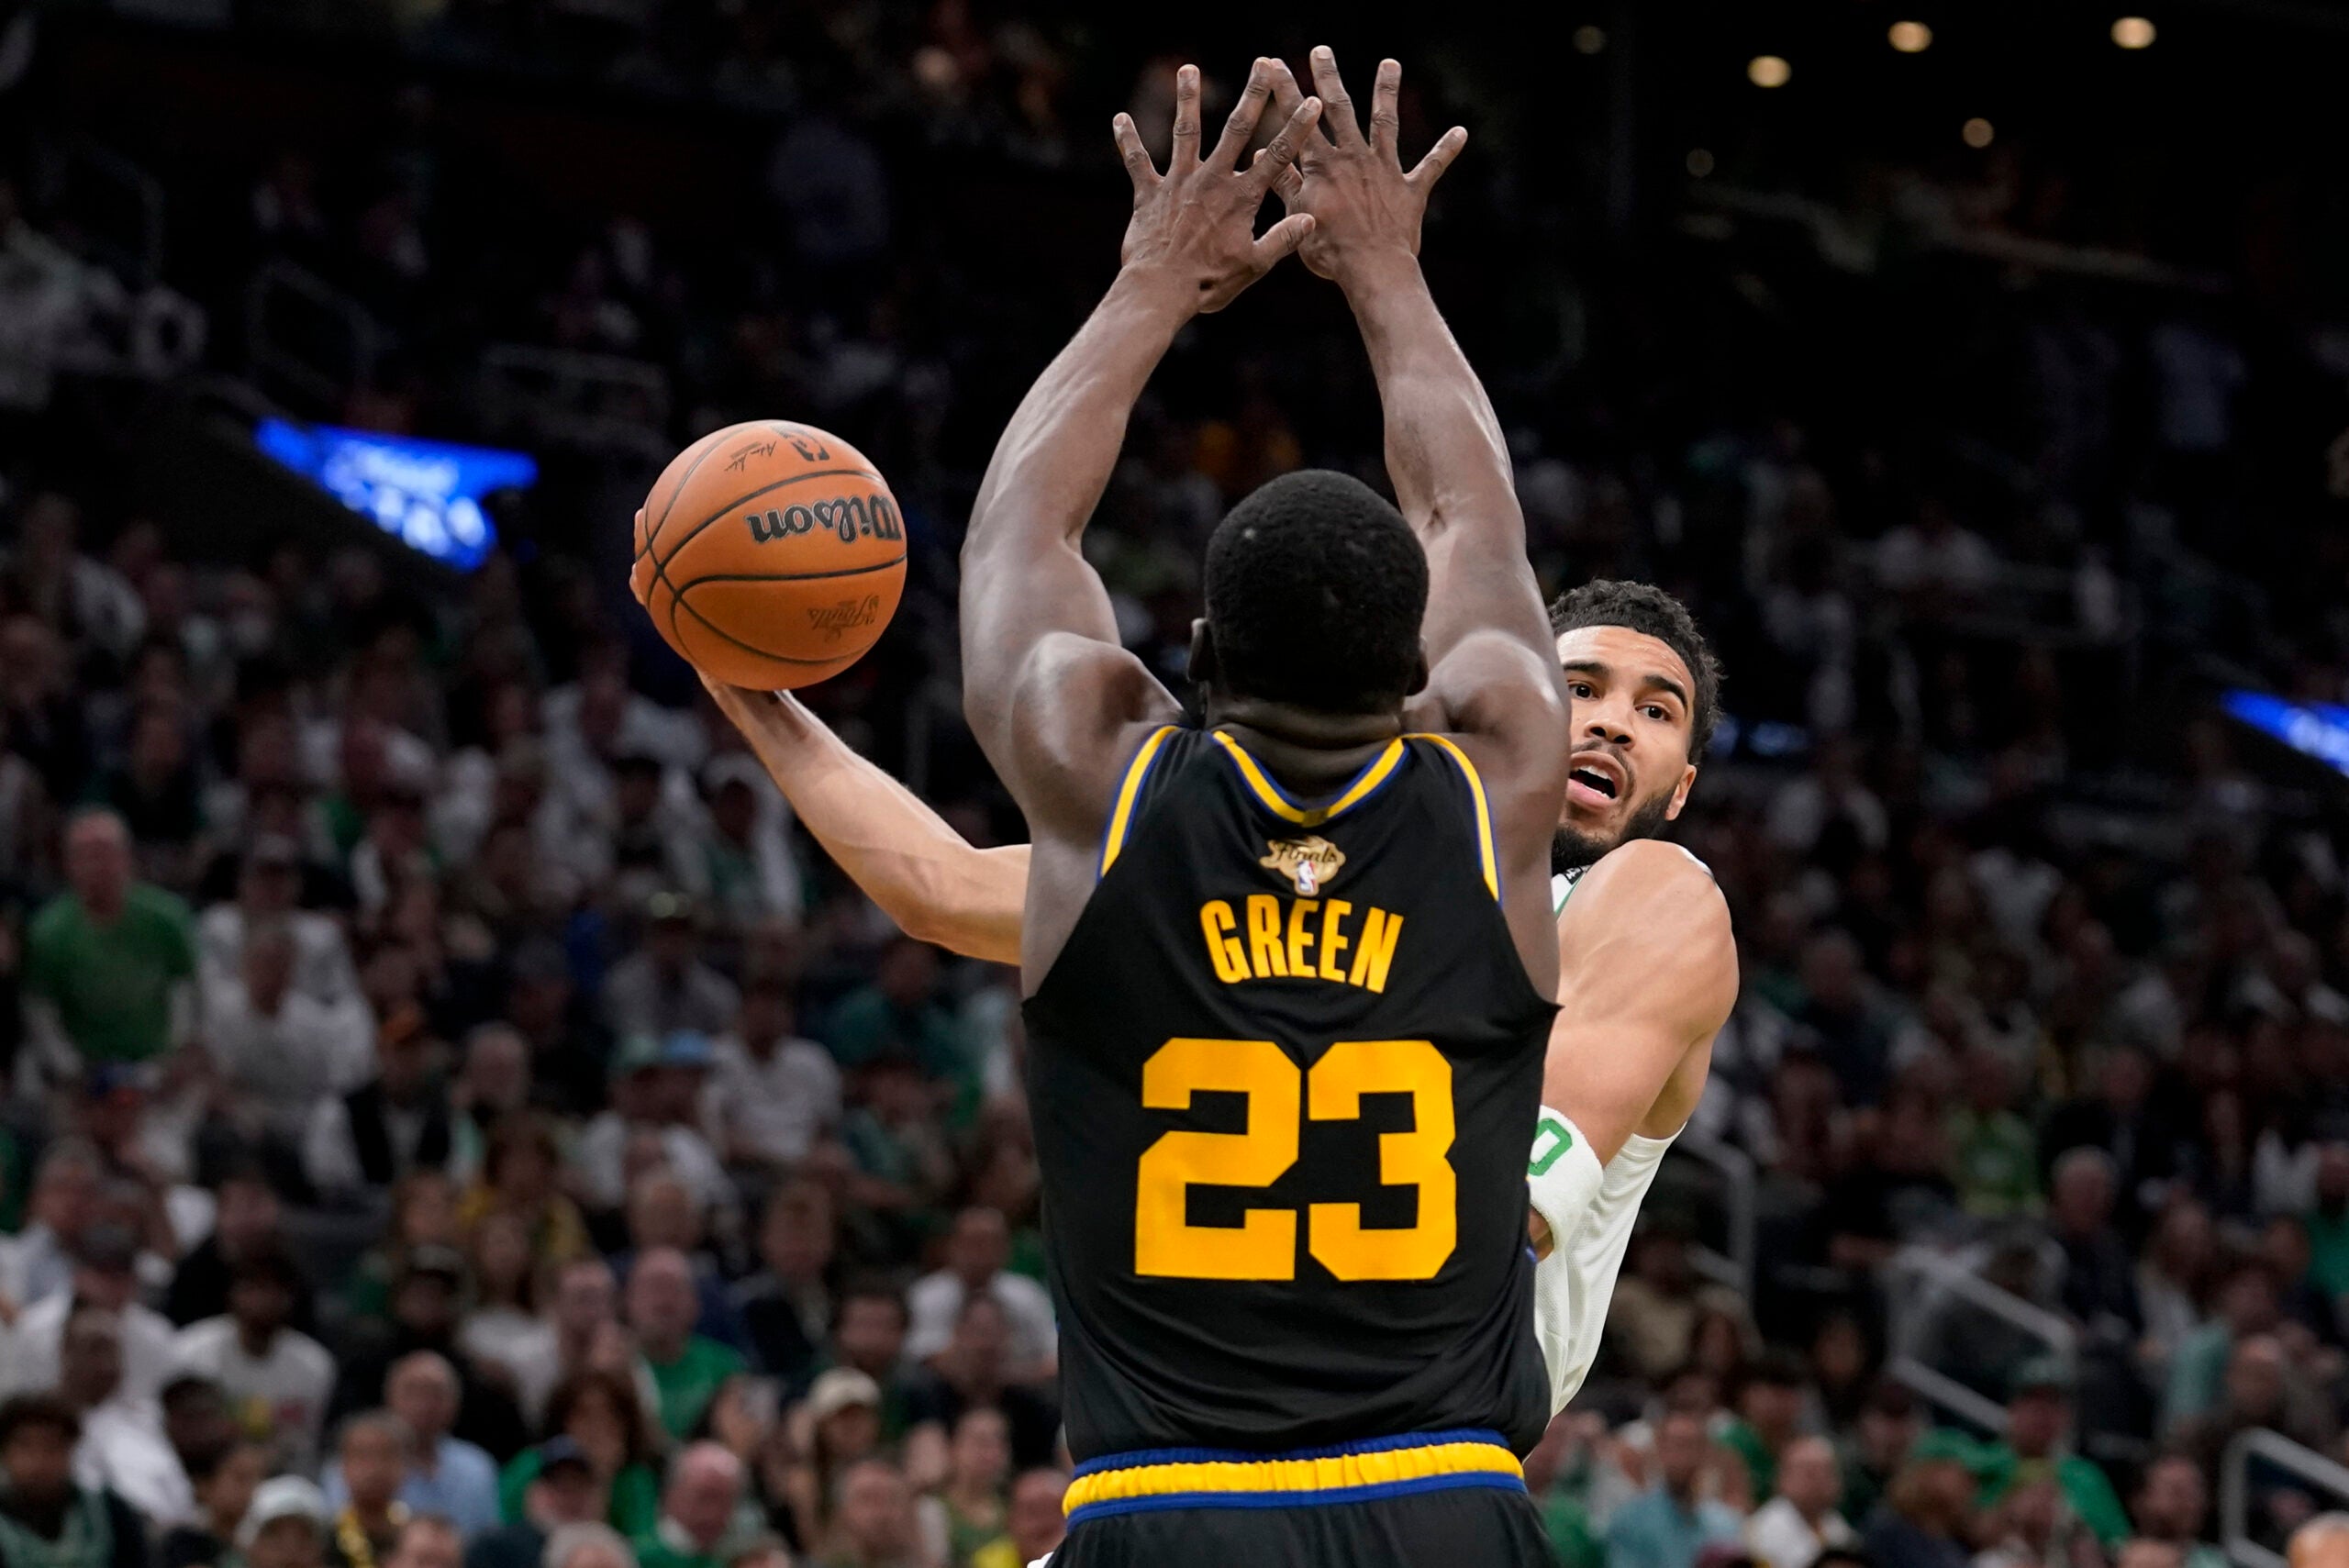 NBA: Jayson Tatum explodes and carries the Celtics to the playoffs